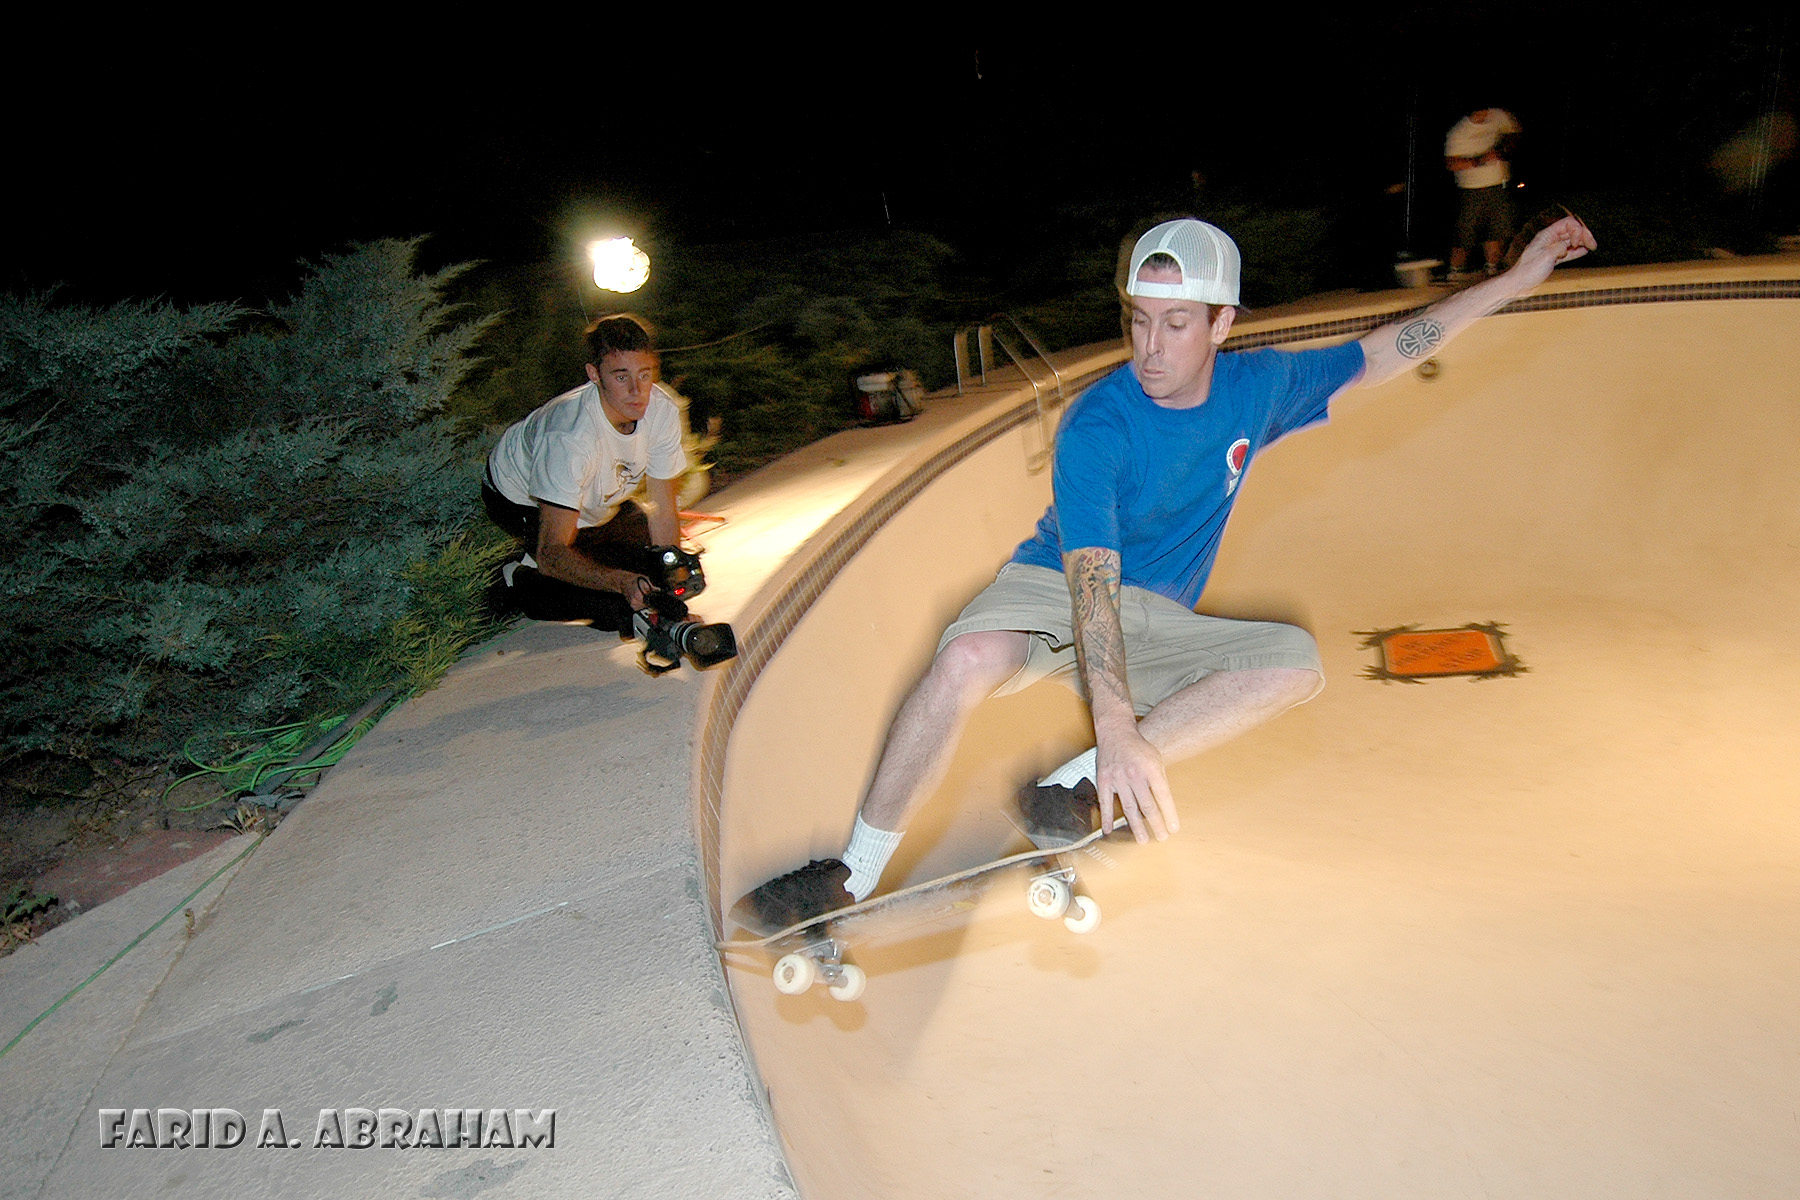 Benji Lanpher filming professional skateboarder Rob Palmer in New Mexico.